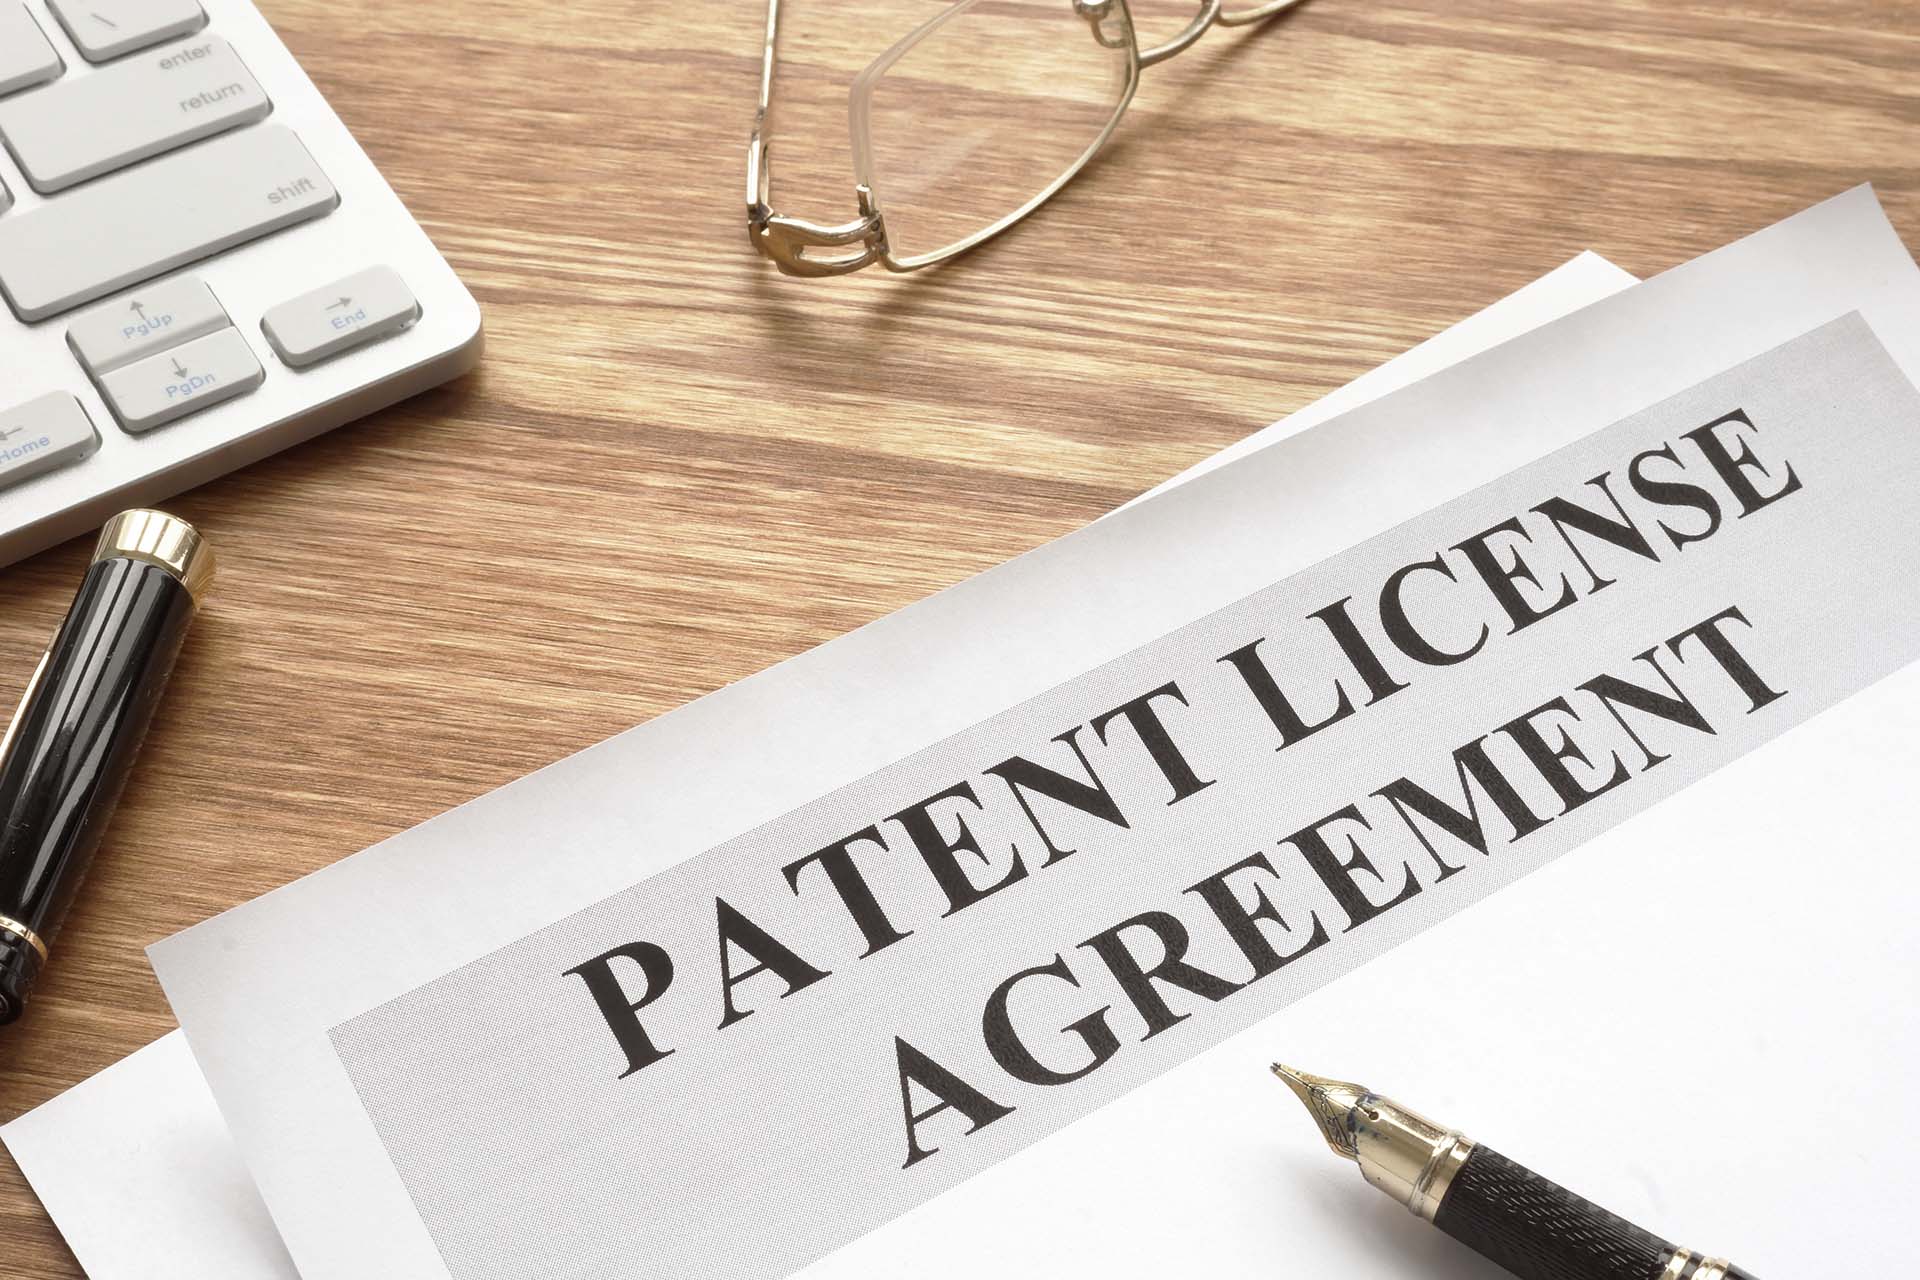 How to license a patent for royalties?